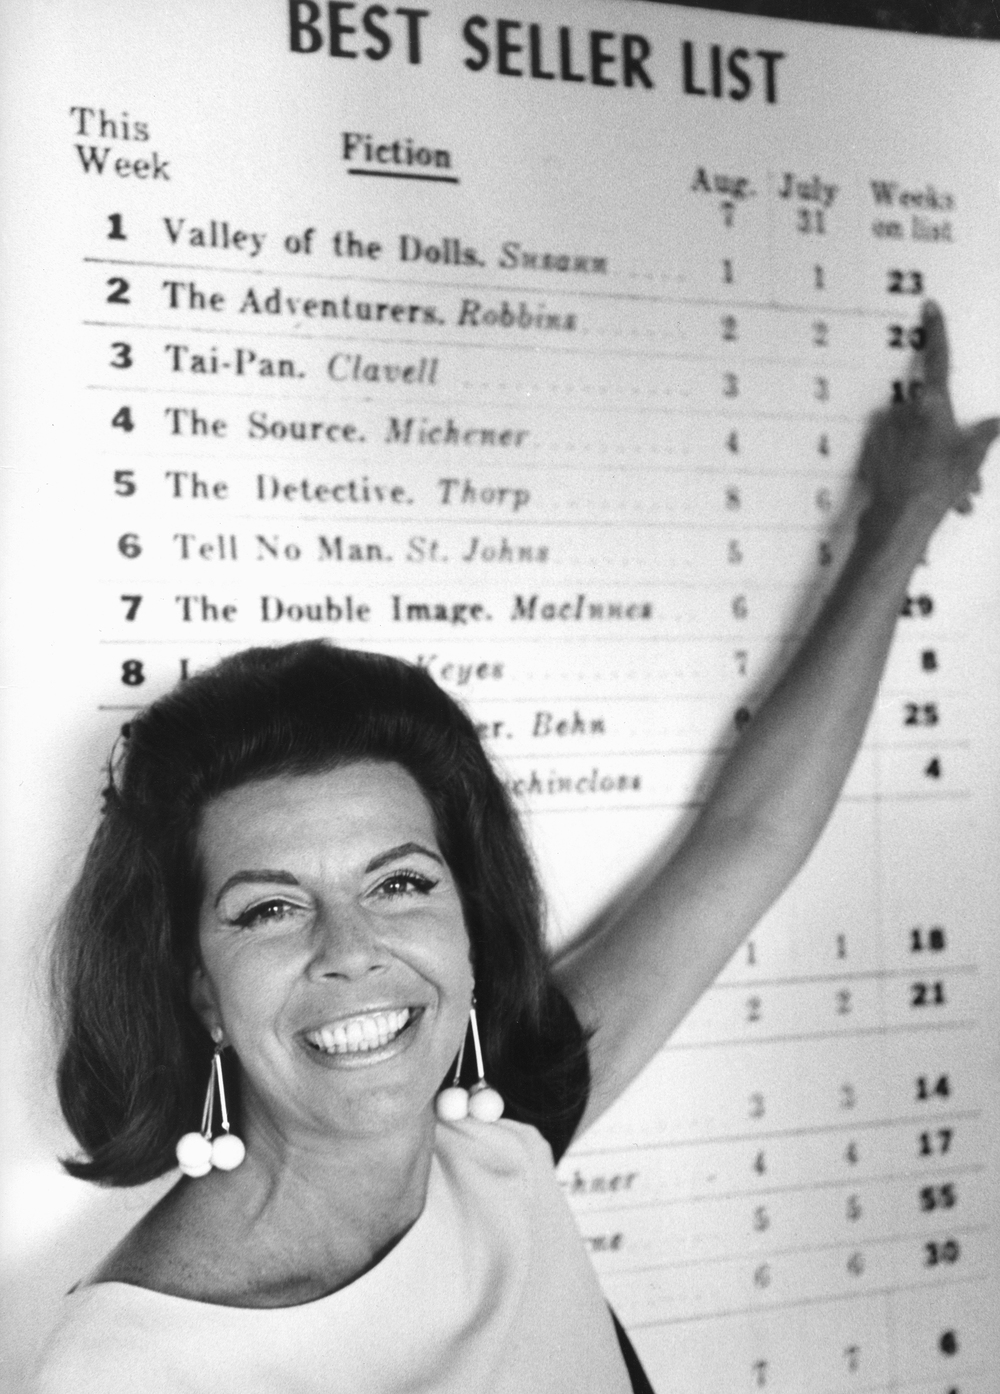 valley of the dolls by jacqueline susann